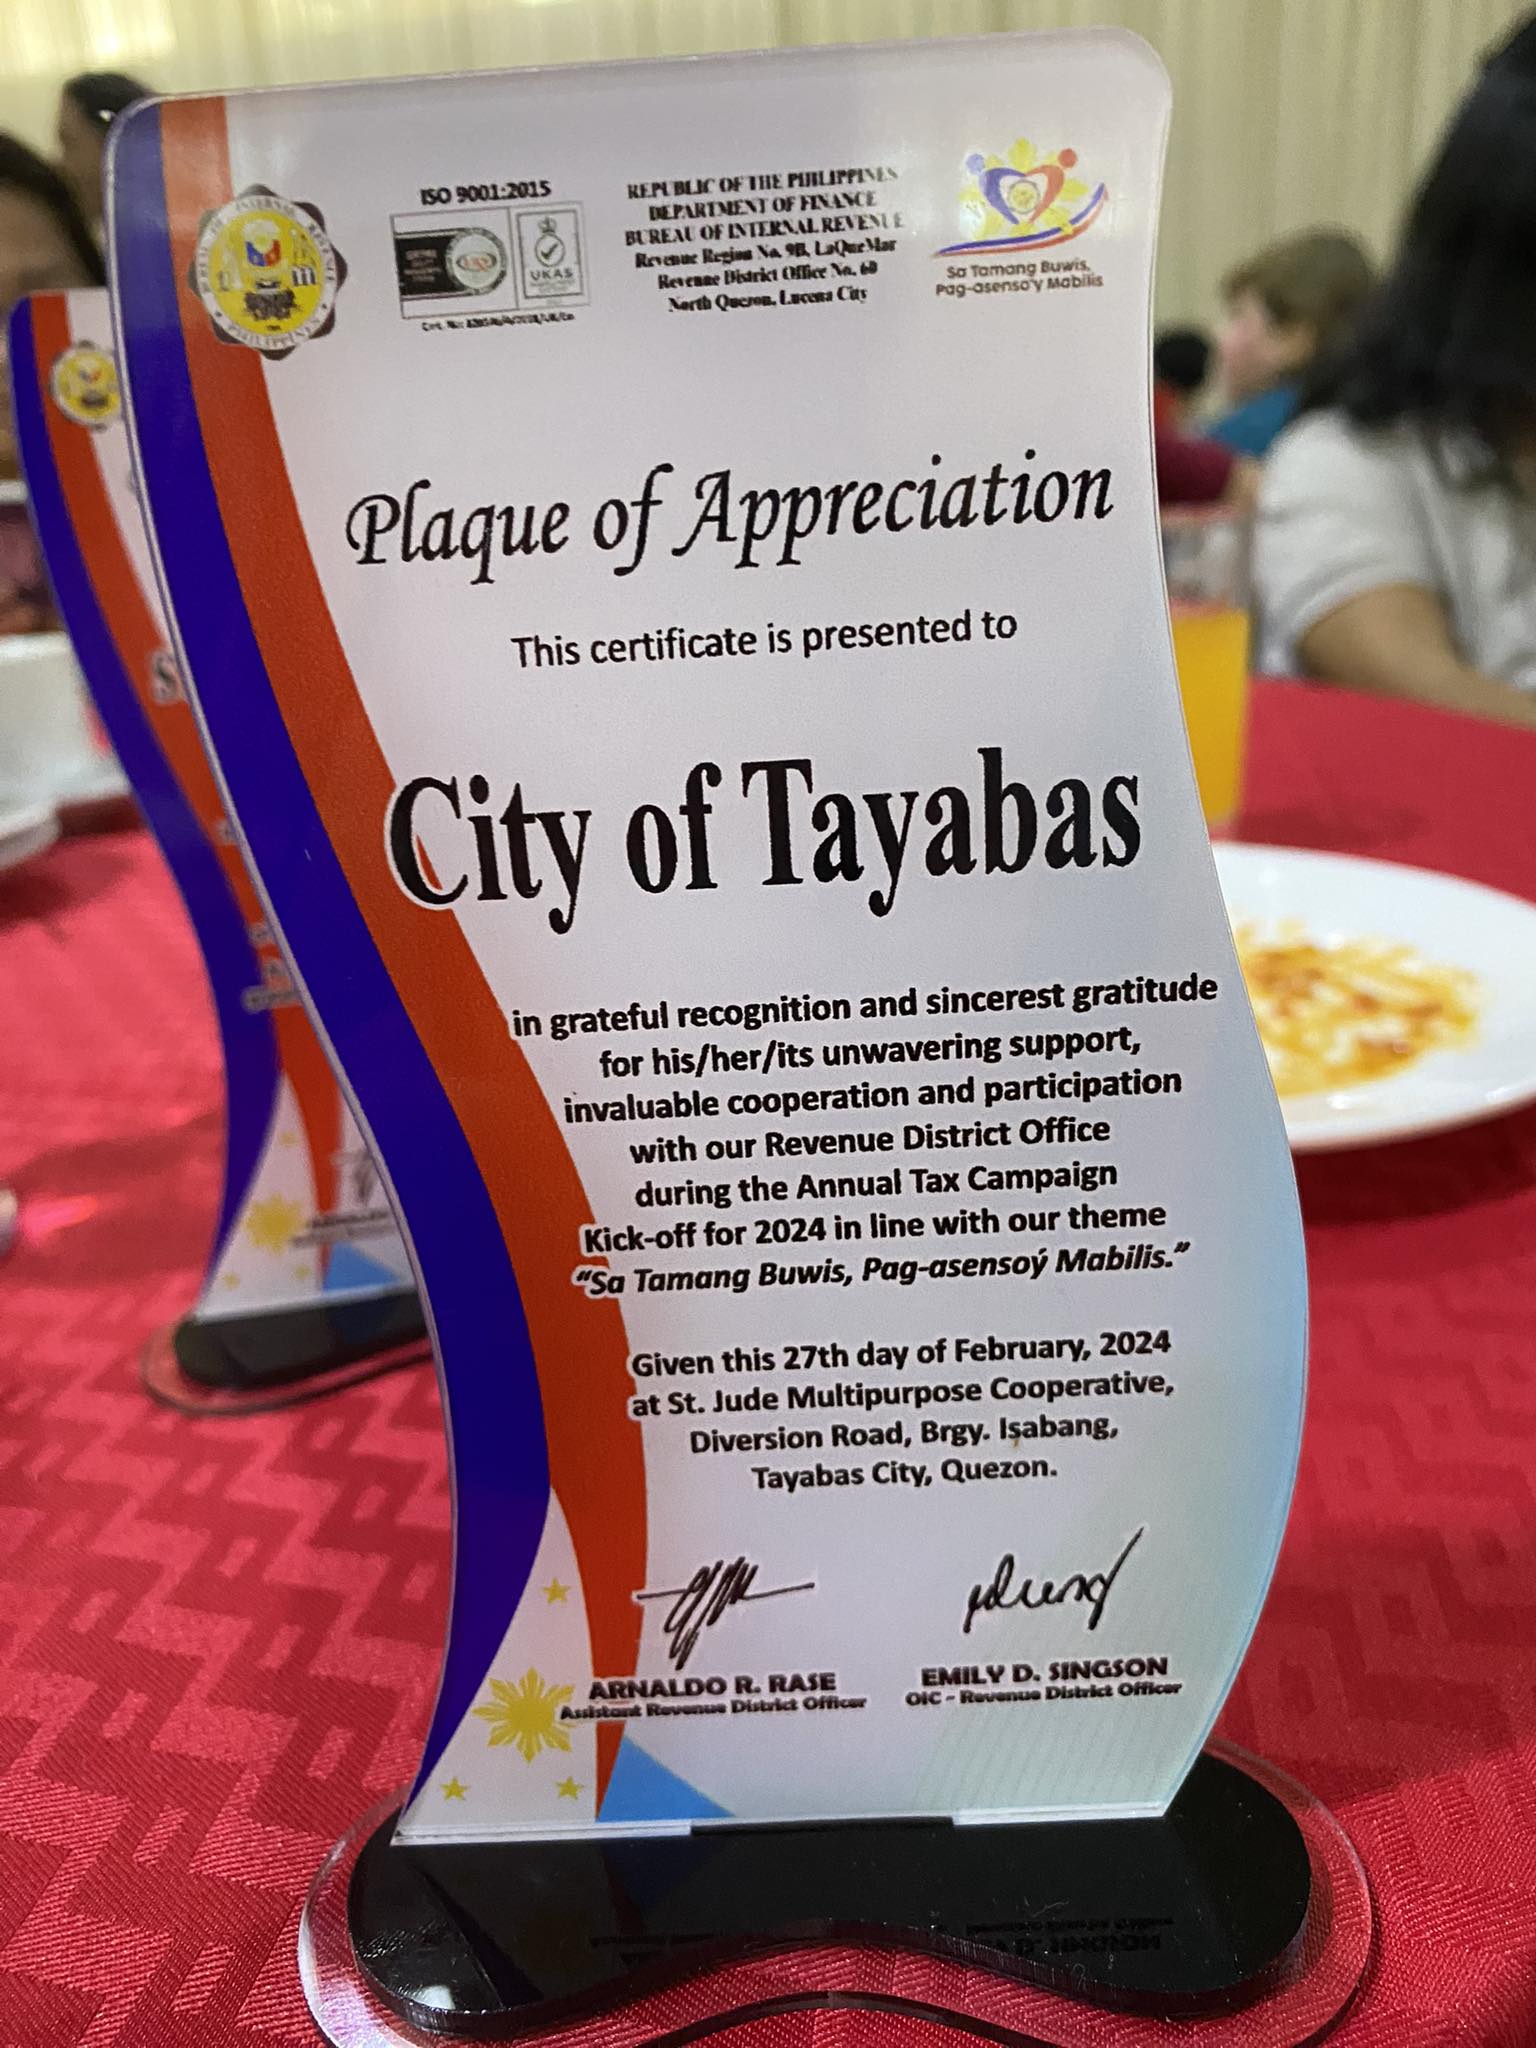 BIR PRESENTS A PLAQUE OF APPRECIATION TO THE CITY OF TAYABAS FOR ITS UNWAVERING SUPPORT TO RDO’S ANNUAL TAX CAMPAIGN KICK-OFF 2024 WITH THE THEME “SA TAMANG BUWIS, PAG-ASENSO’Y MABILIS.”